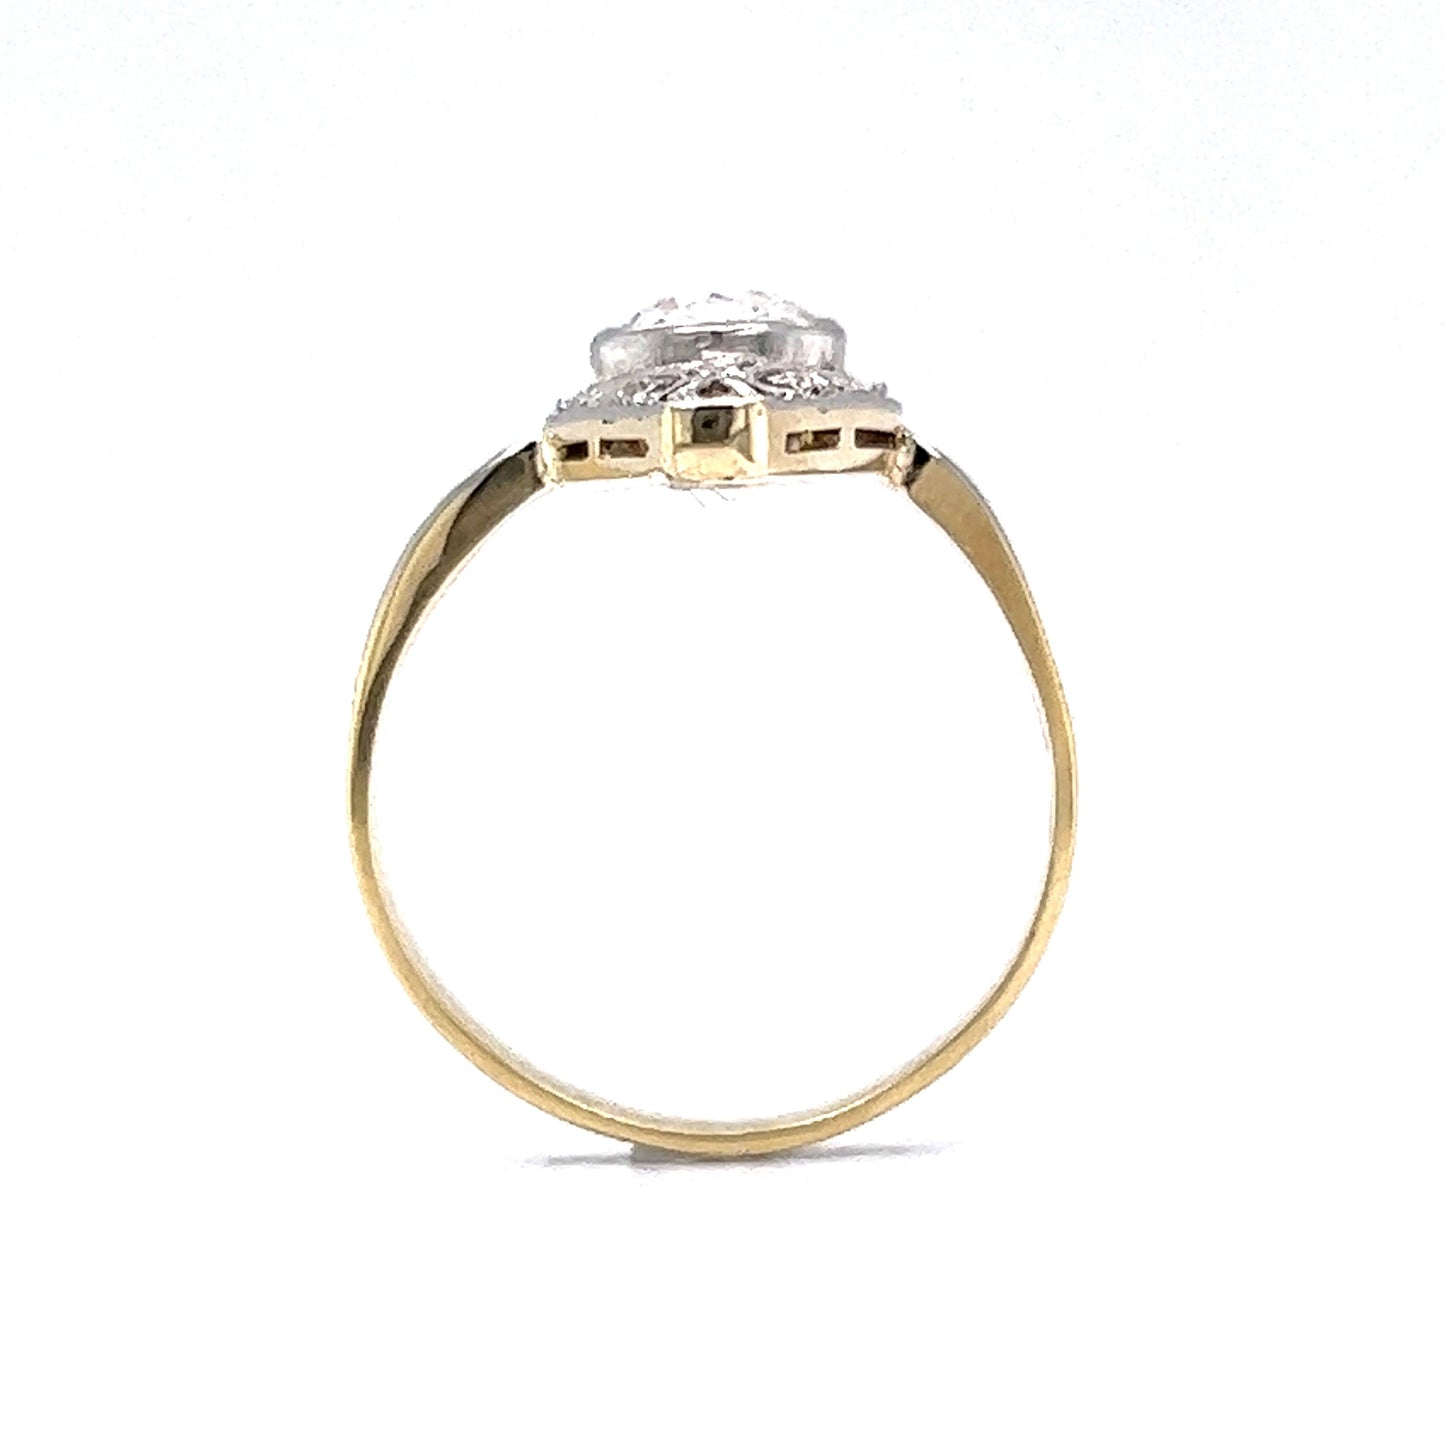 Antique Diamond Navette Ring in White & Yellow Gold